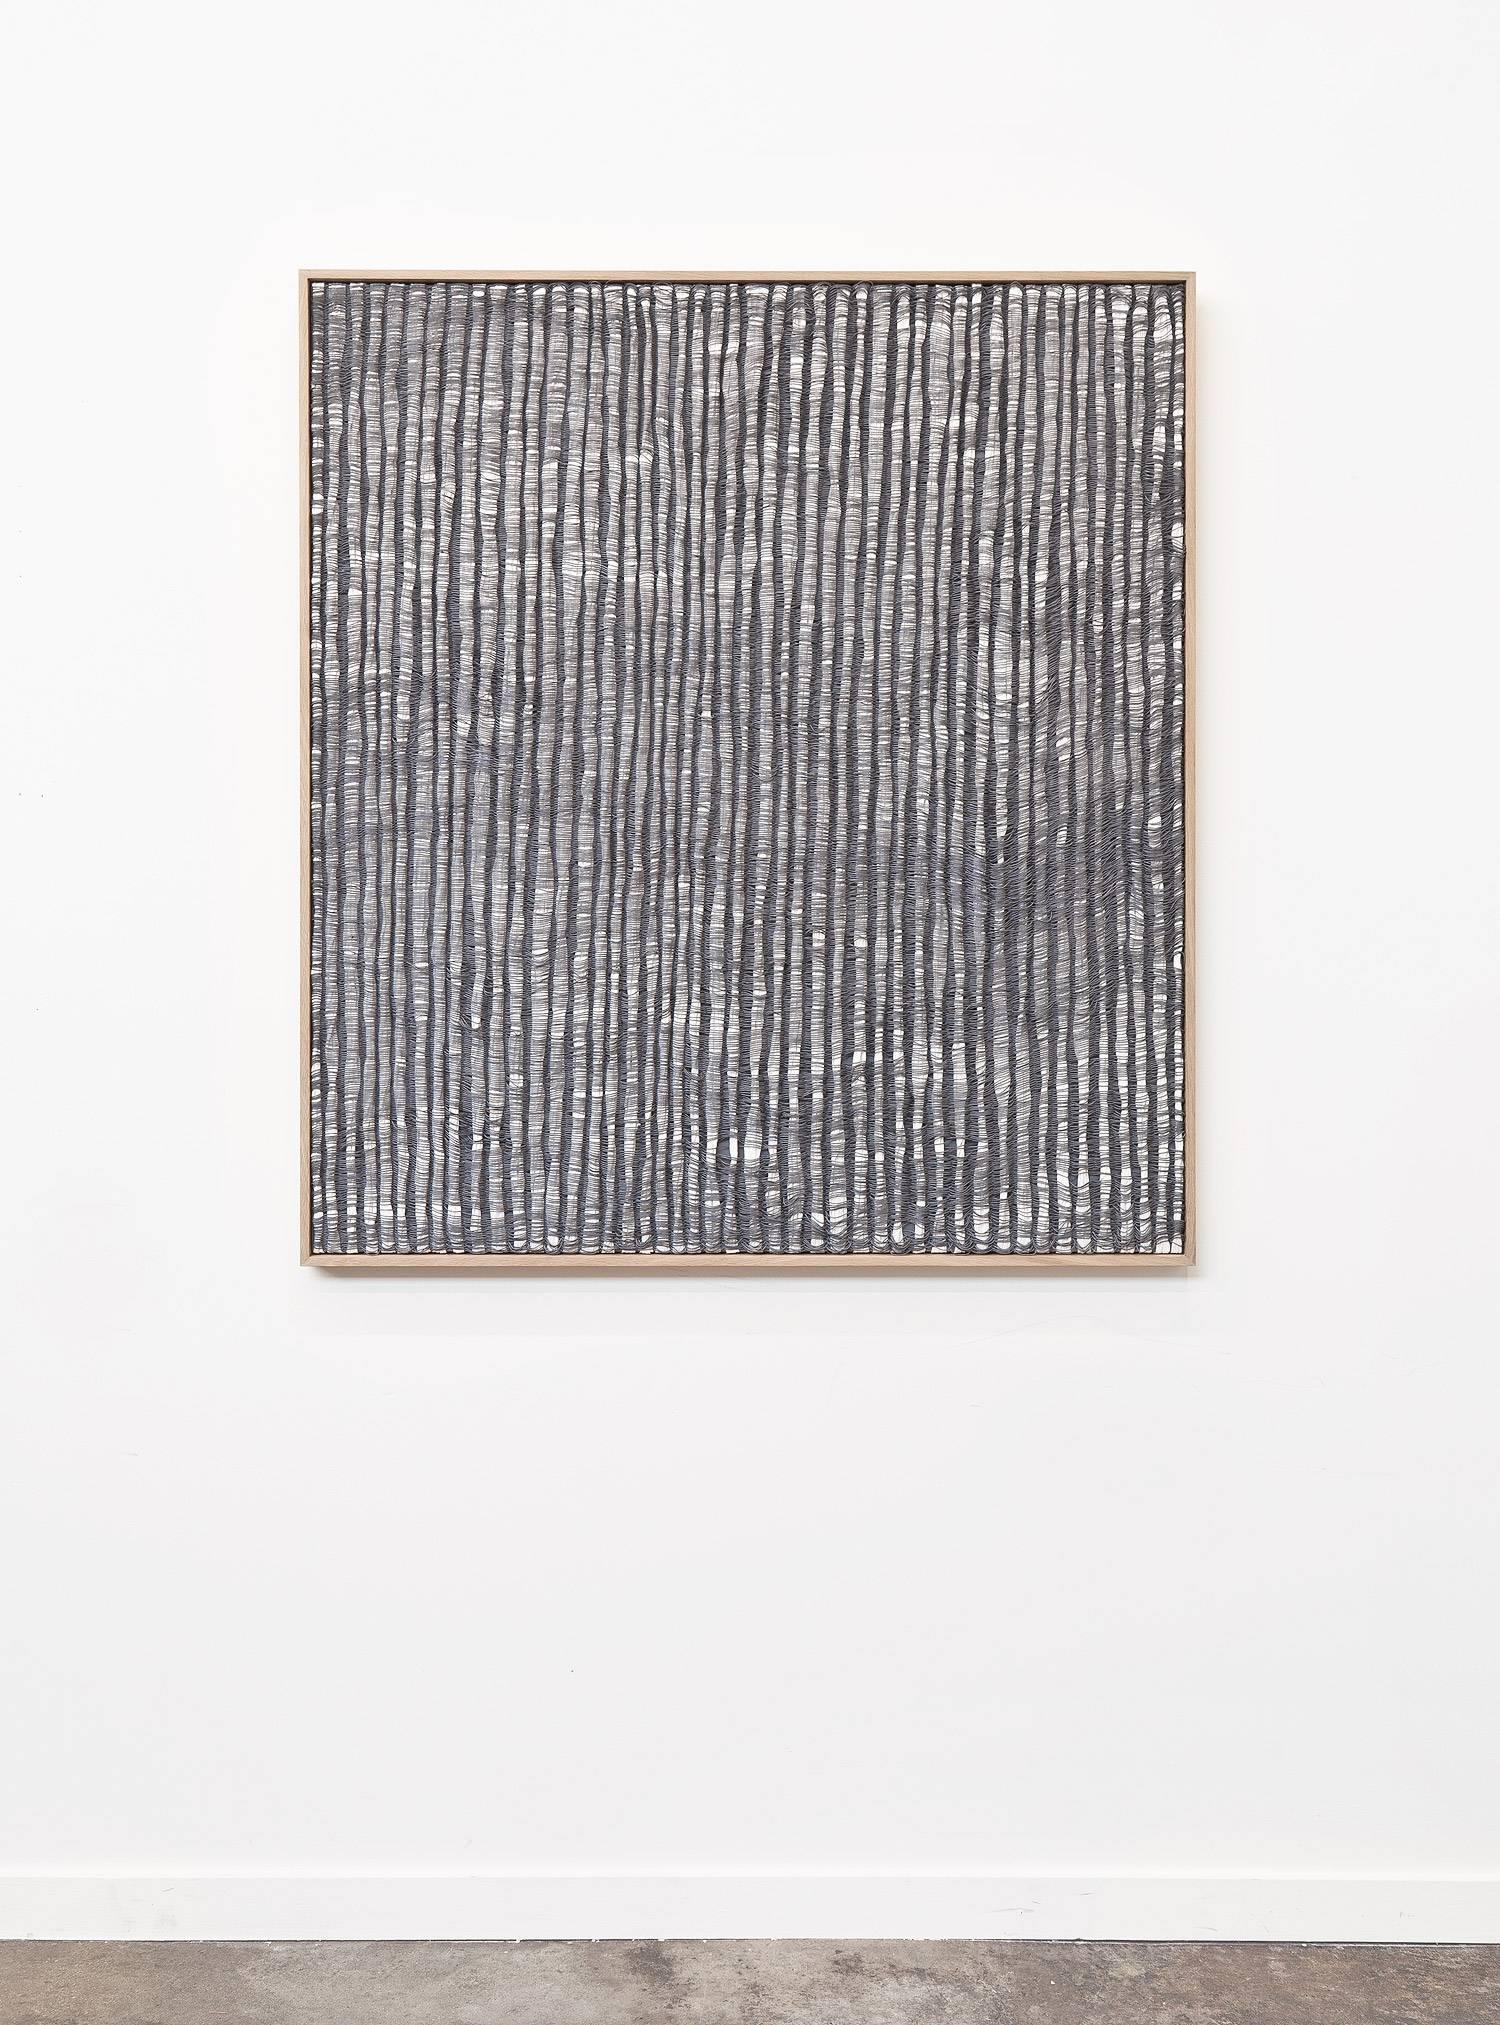 Post-Modern Contemporary Weaving Textile Fiber Art, Gray Waves by Mimi Jung For Sale